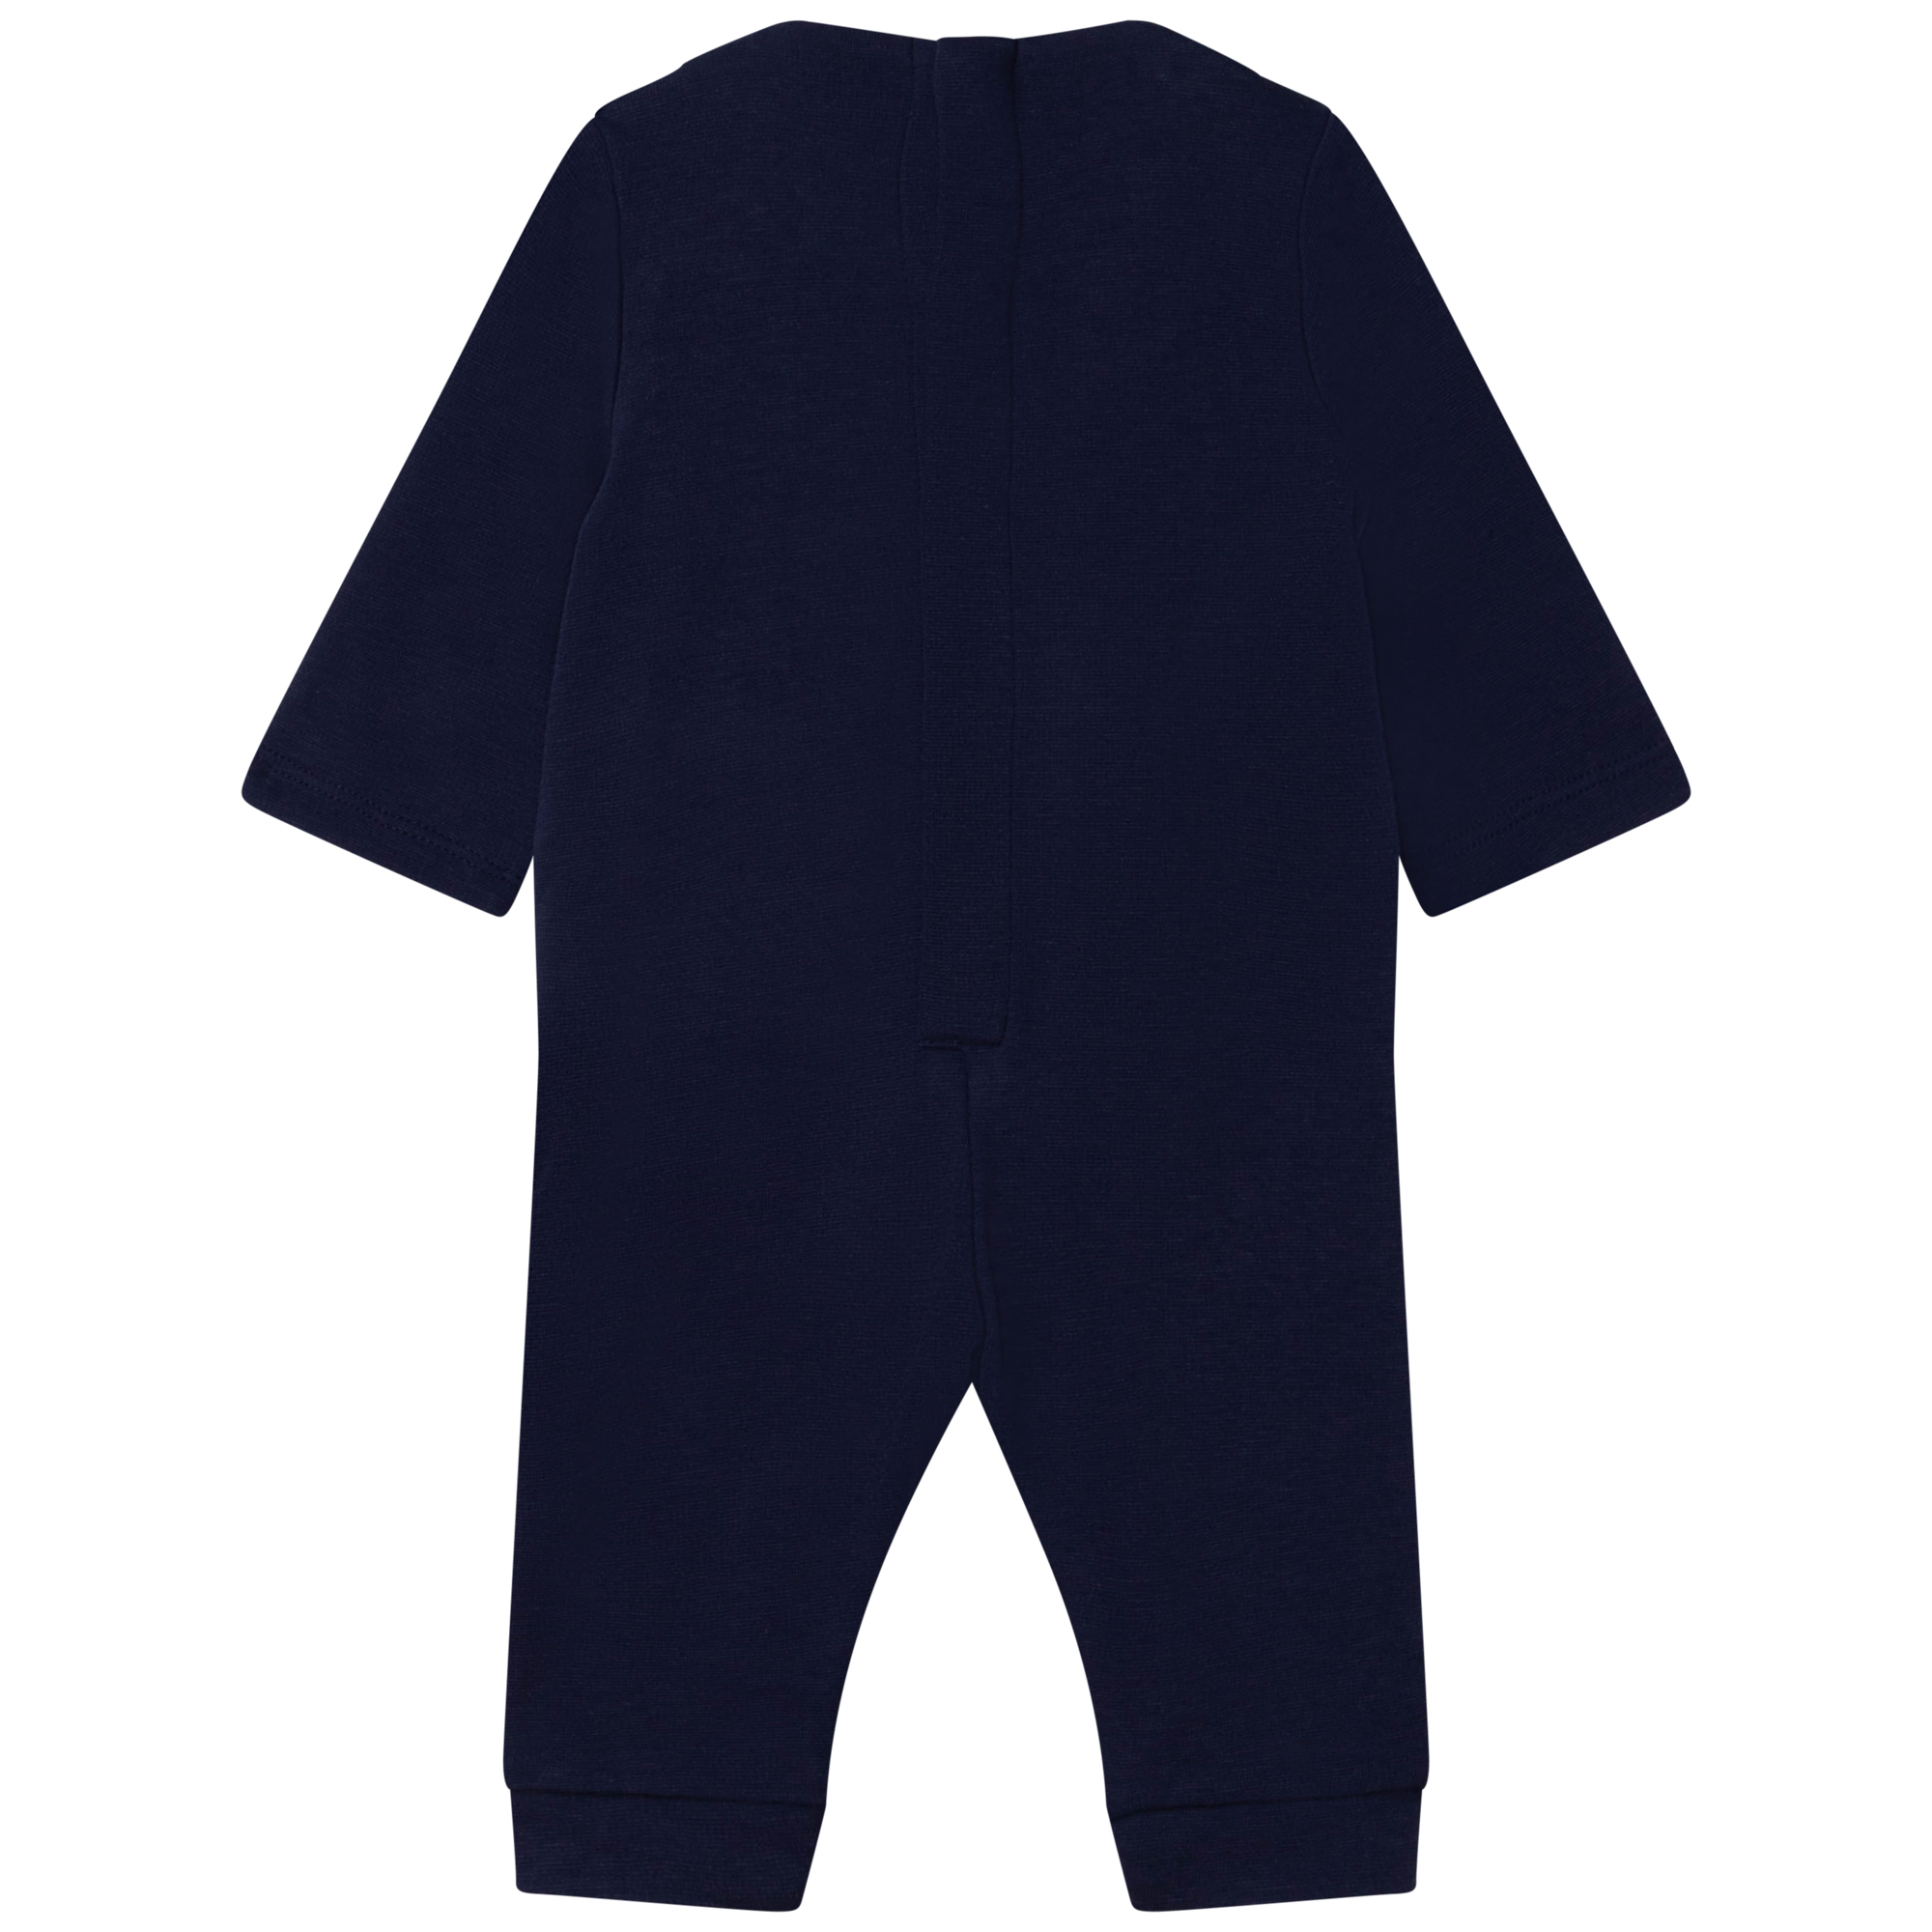 3-in-1 playsuit set BOSS for BOY